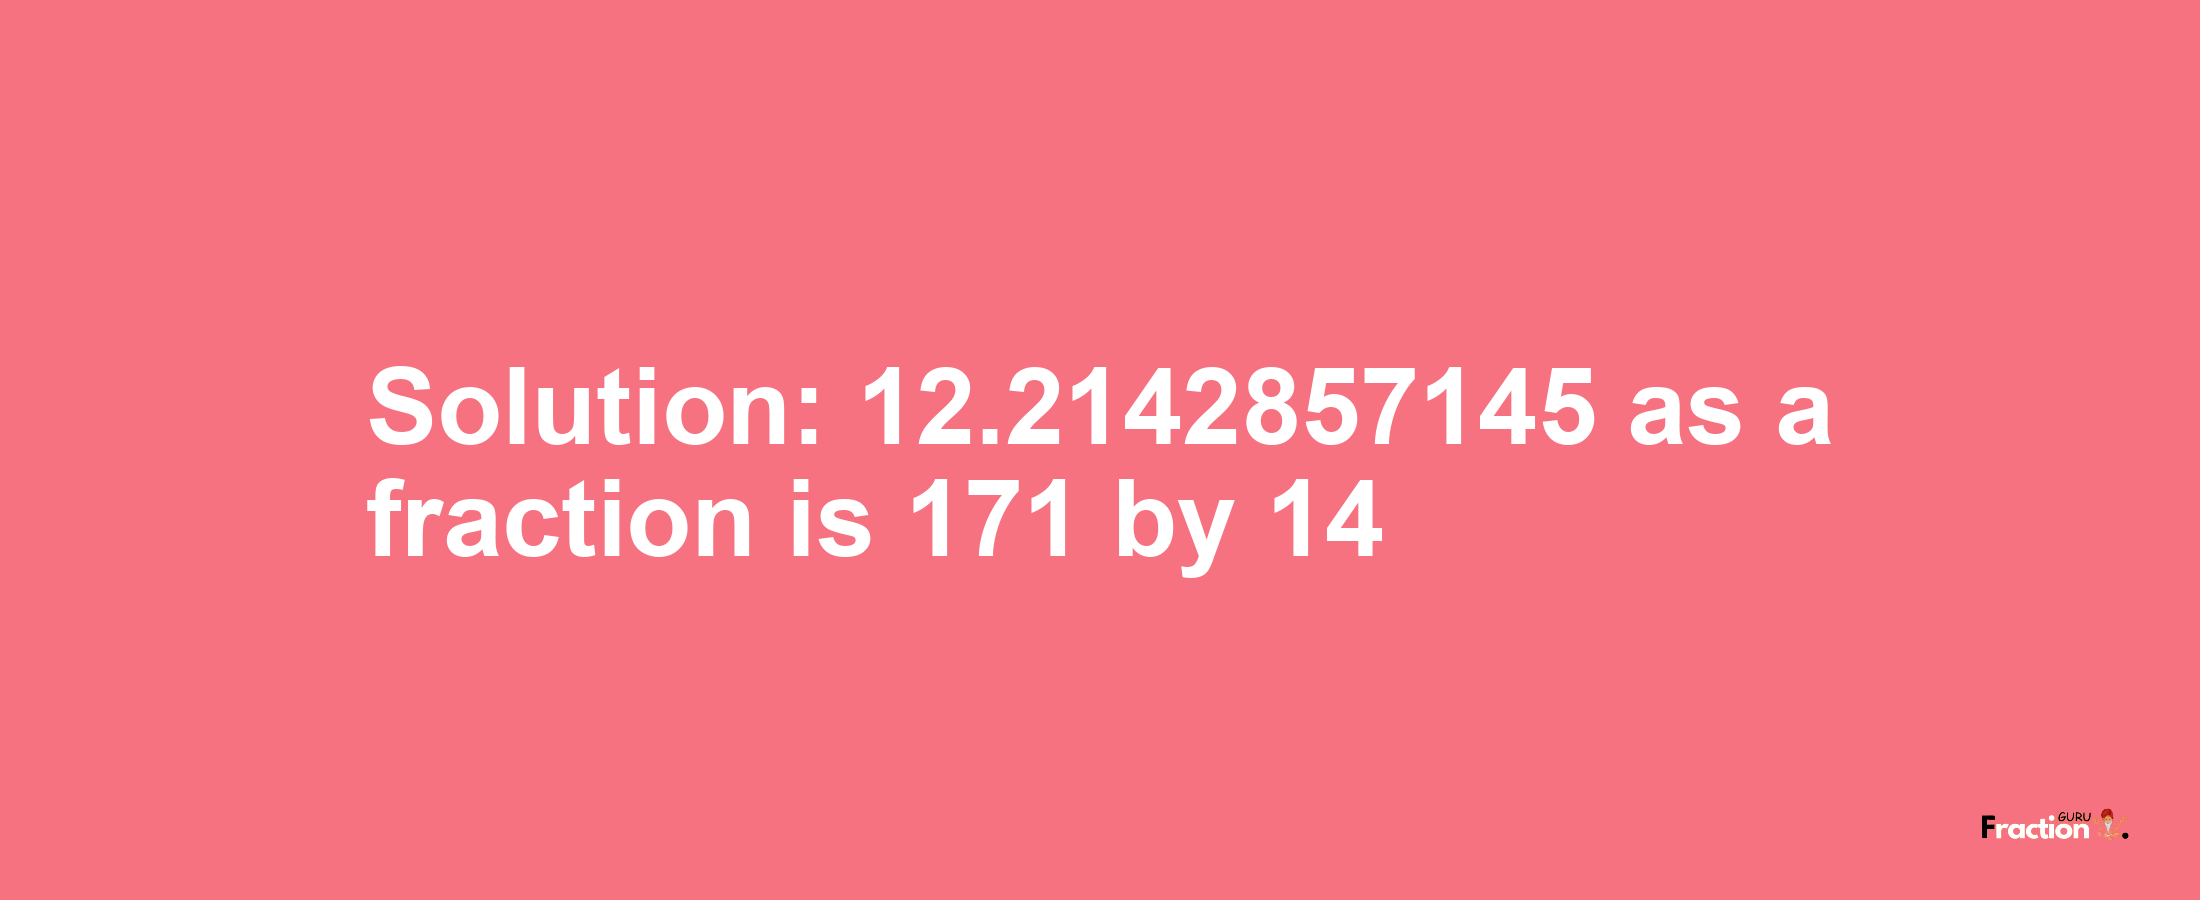 Solution:12.2142857145 as a fraction is 171/14